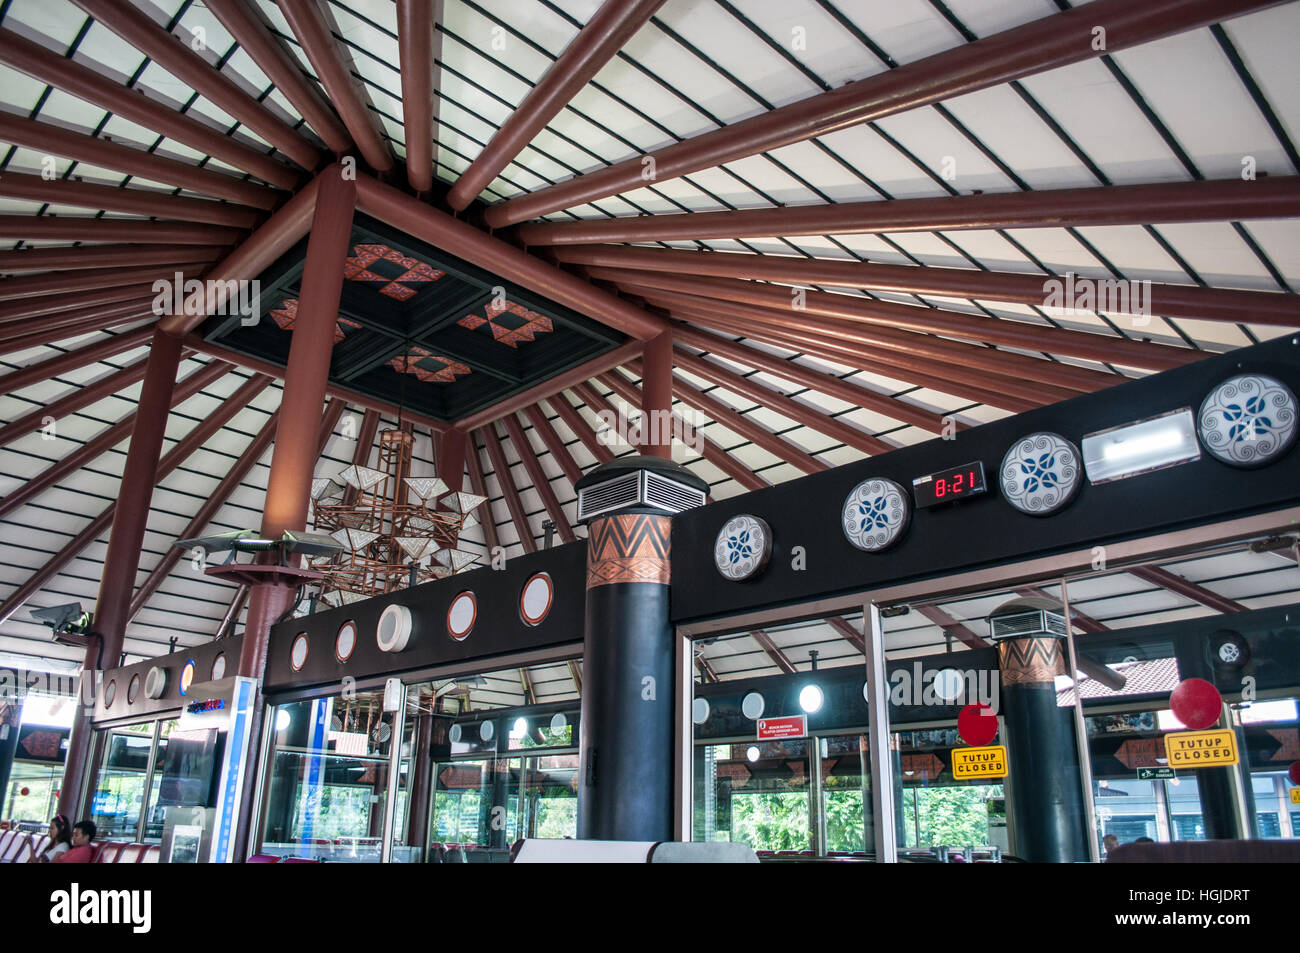 wooden beams, roof, gate at Jakarta airport Stock Photo